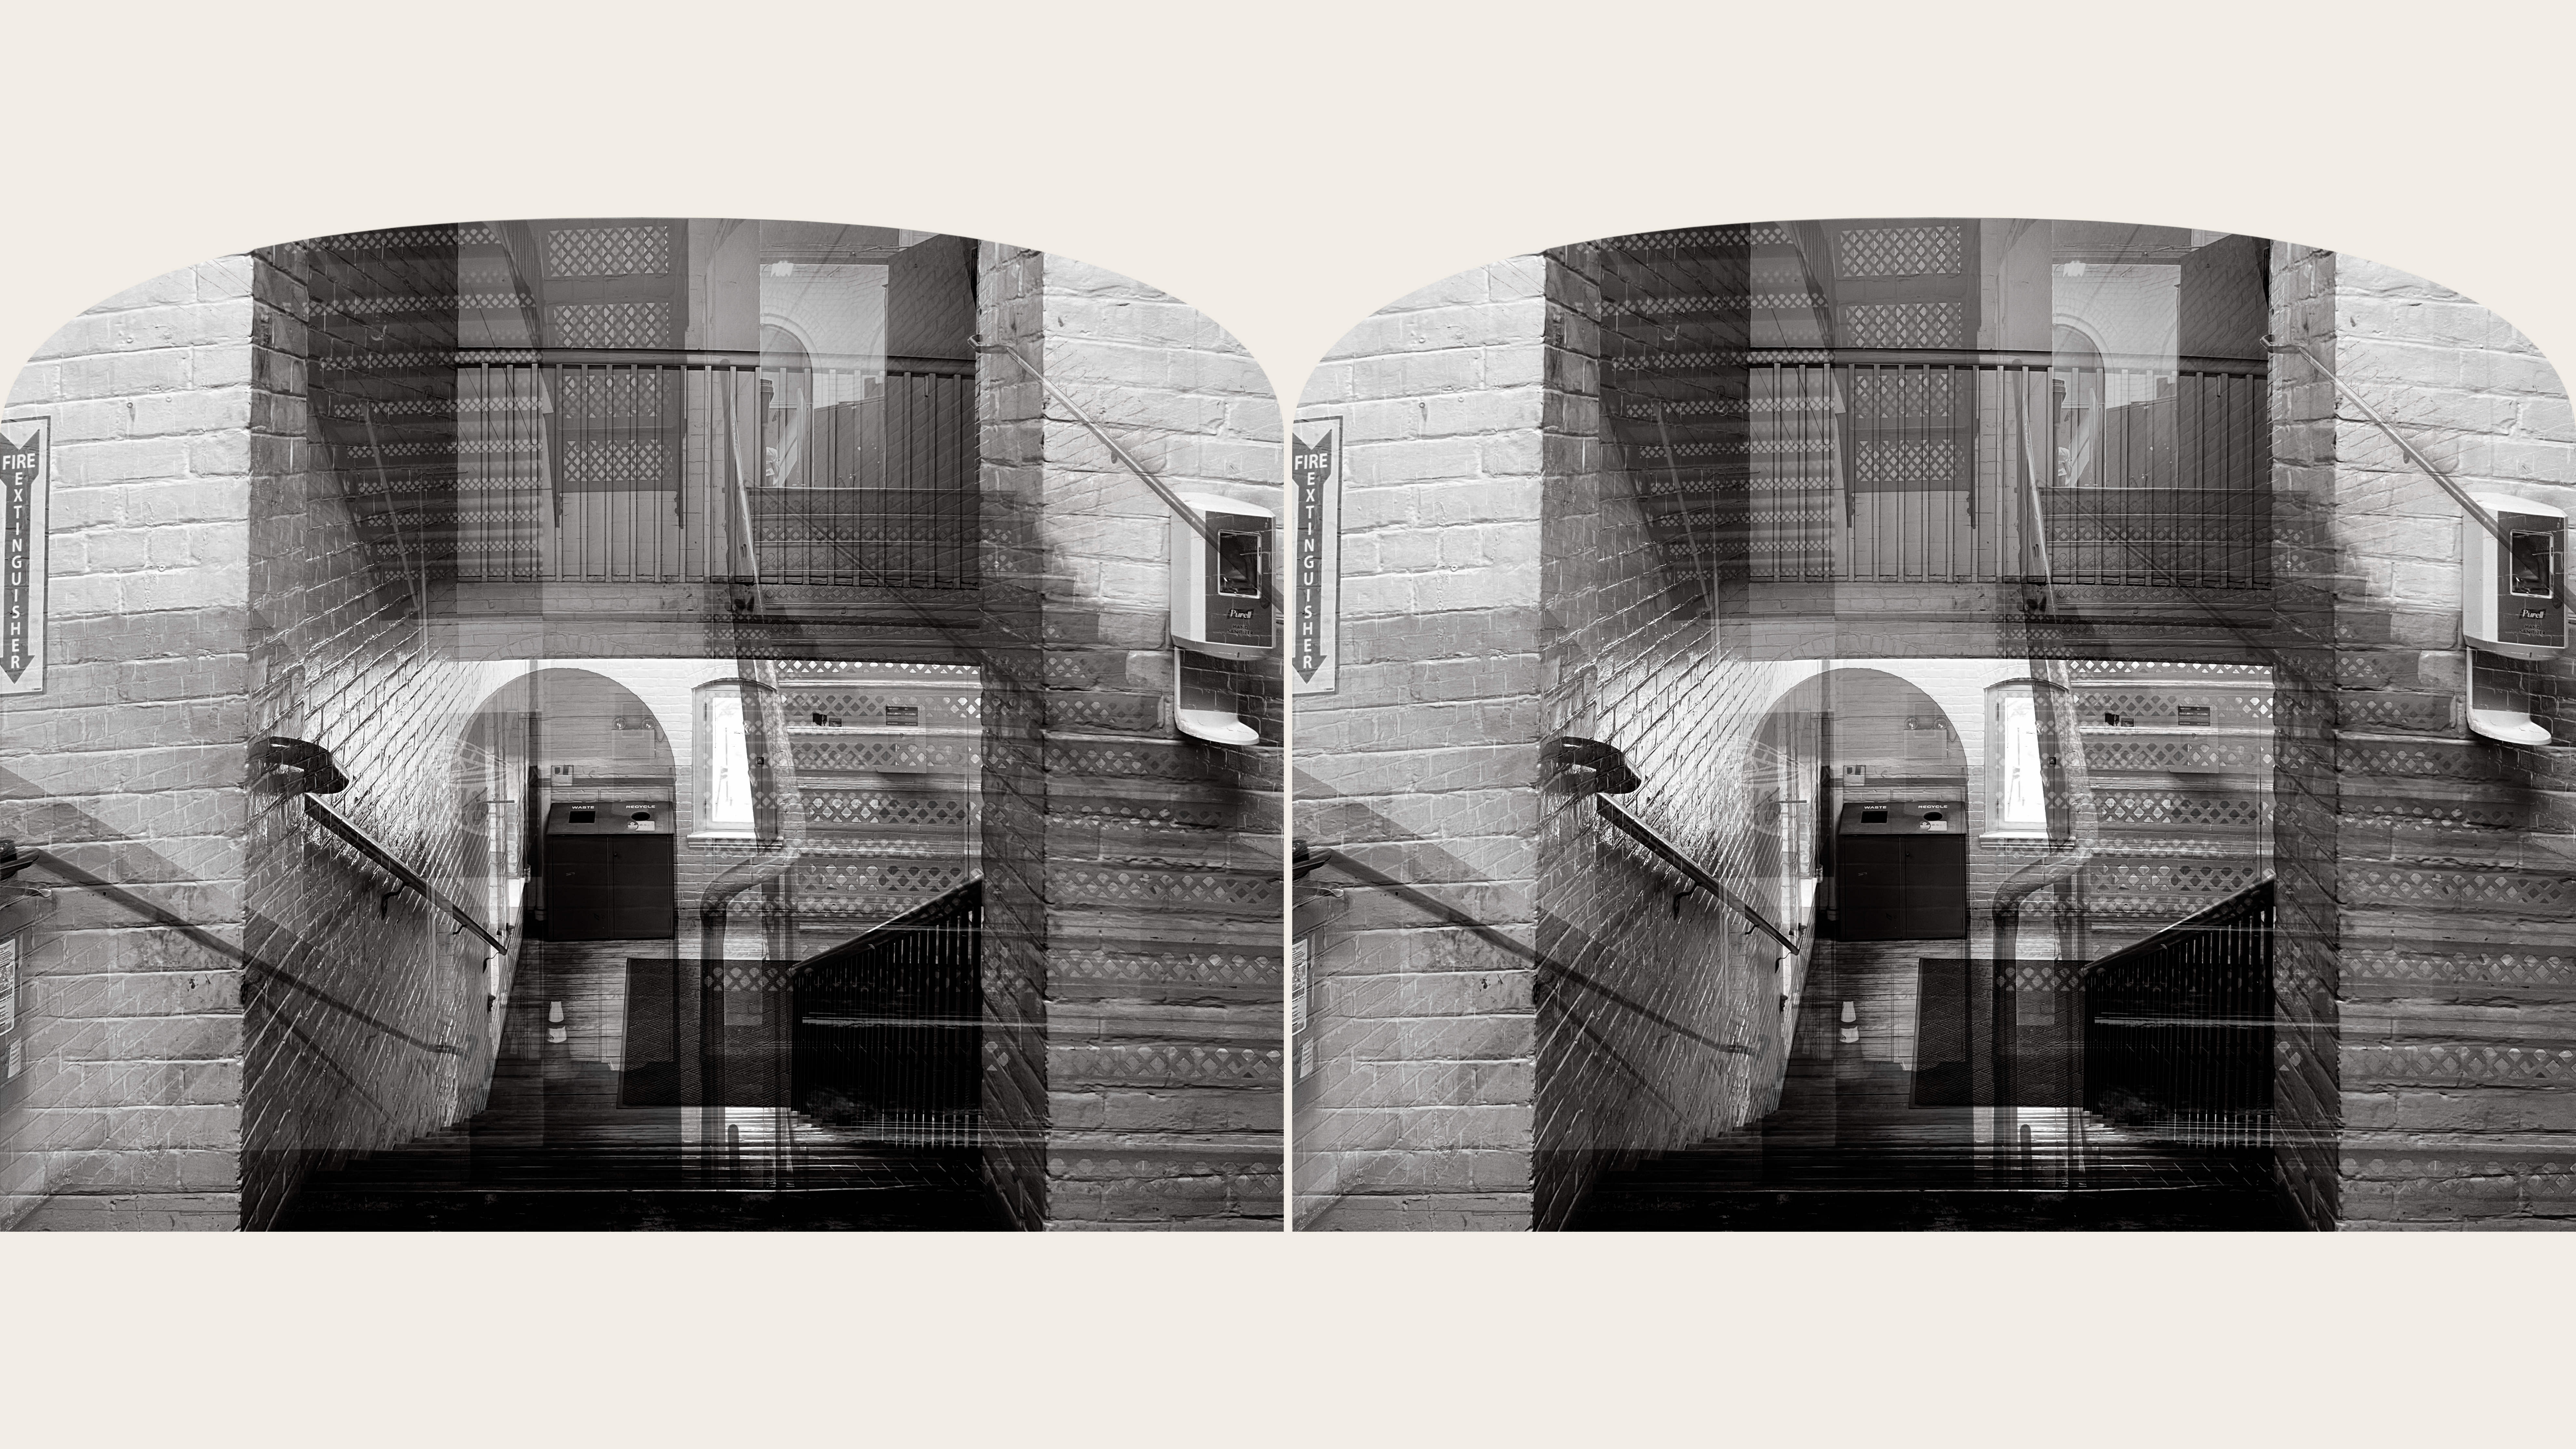 /A%20black-and-white%20stereoscopic%20image%20of%20the%20Waterman%20interior%20staircase.%20The%20symmetrical%20composition%20features%20mirrored%20perspectives%20and%20visible%20architectural%20details%2C%20creating%20a%20sense%20of%20movement%20and%20capturing%20the%20site%27s%20dynamic%20experience.